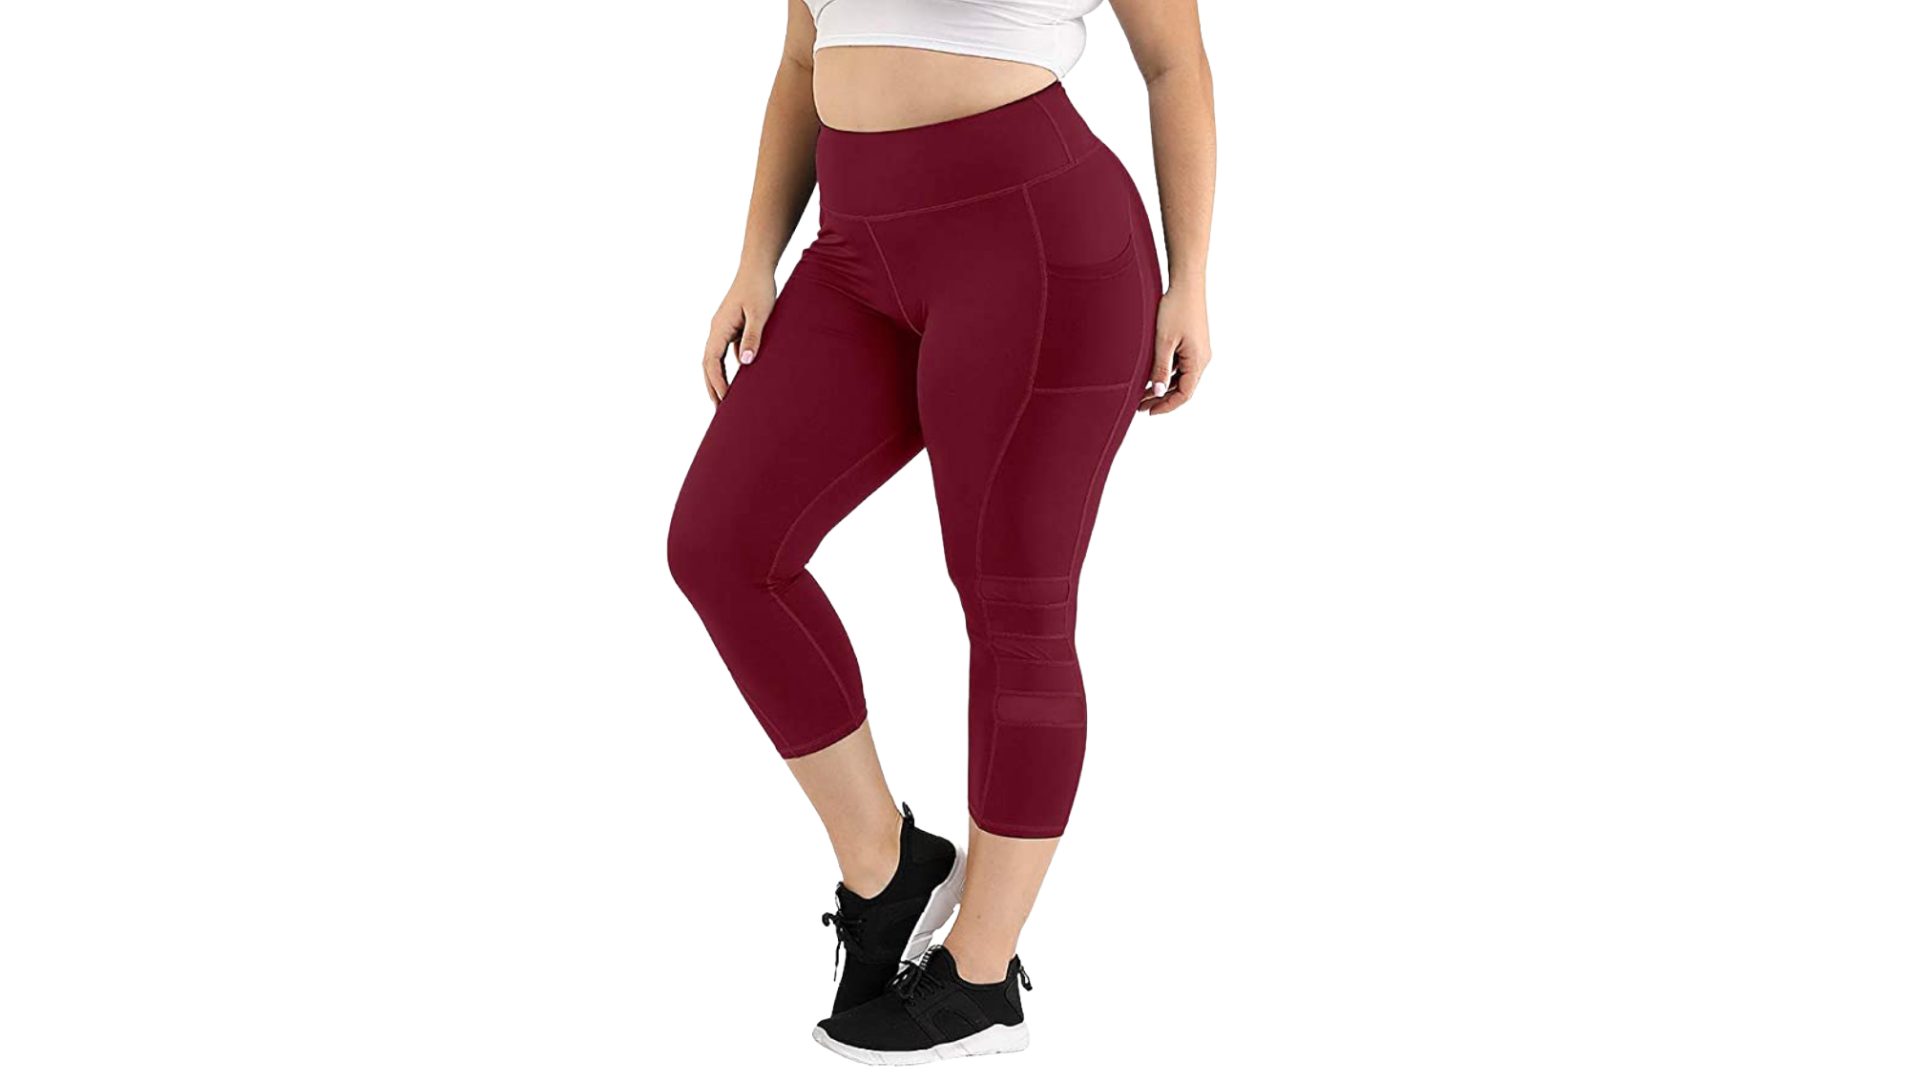 GAYHAY Leggings with Pockets for Women Reg & Plus Size - Capri Yoga Pants  High Waist Tummy Control Compression for Workout